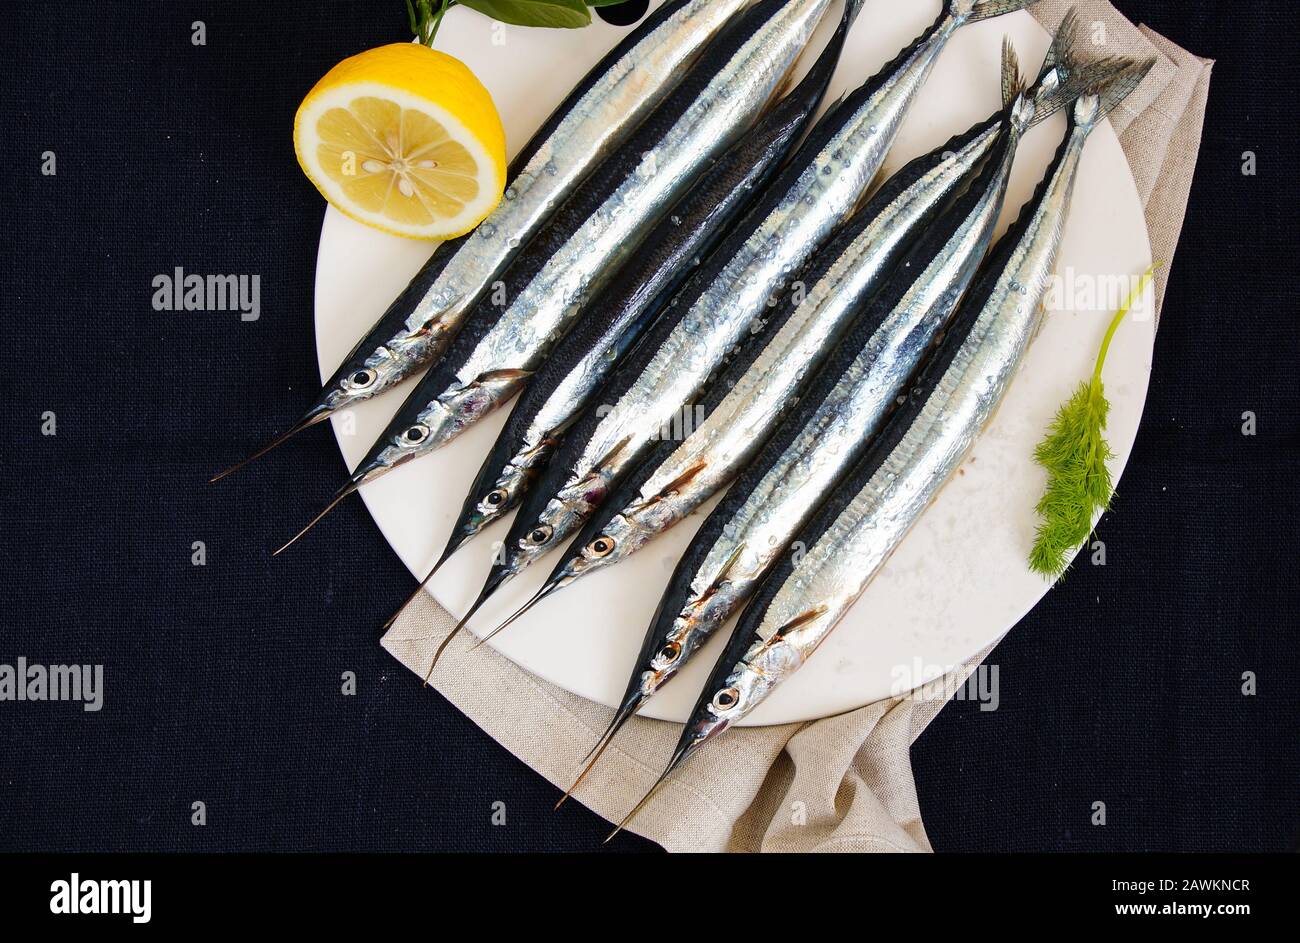 raw fresh needlefish (belonidae family) on the plate ready to cook Stock Photo